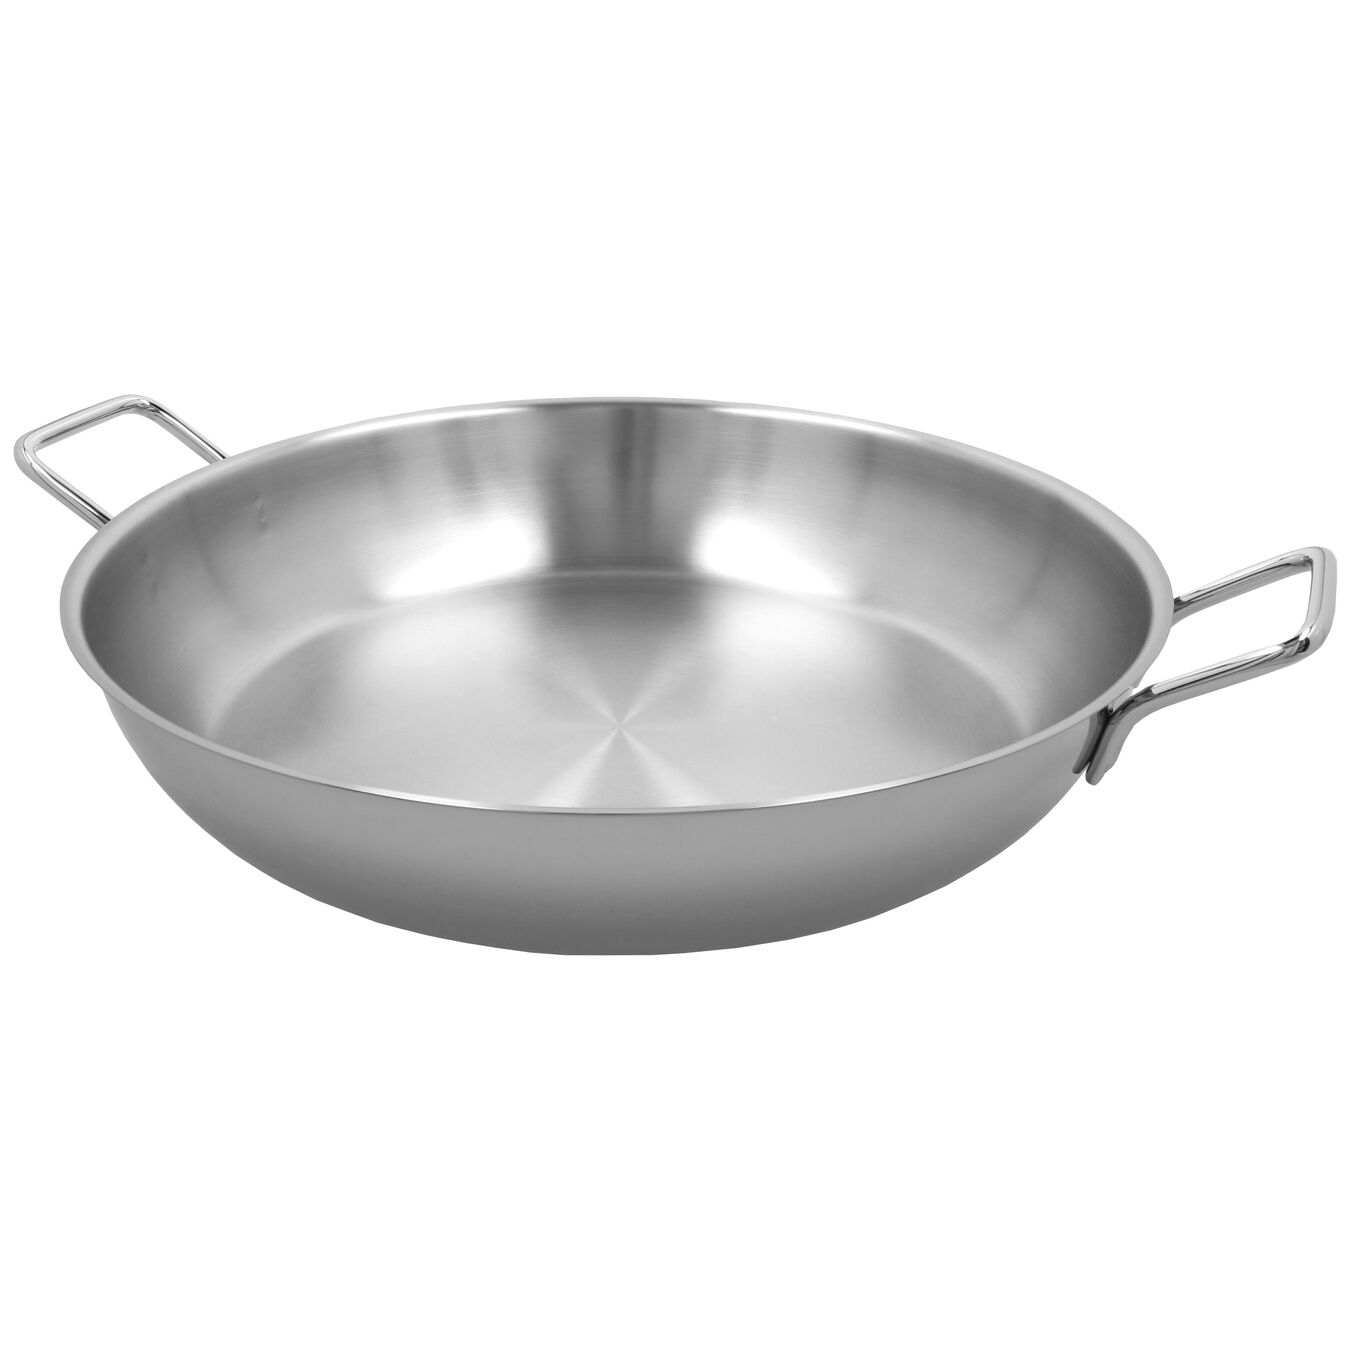 18-inch, Paella pan without lid, silver,,large 3